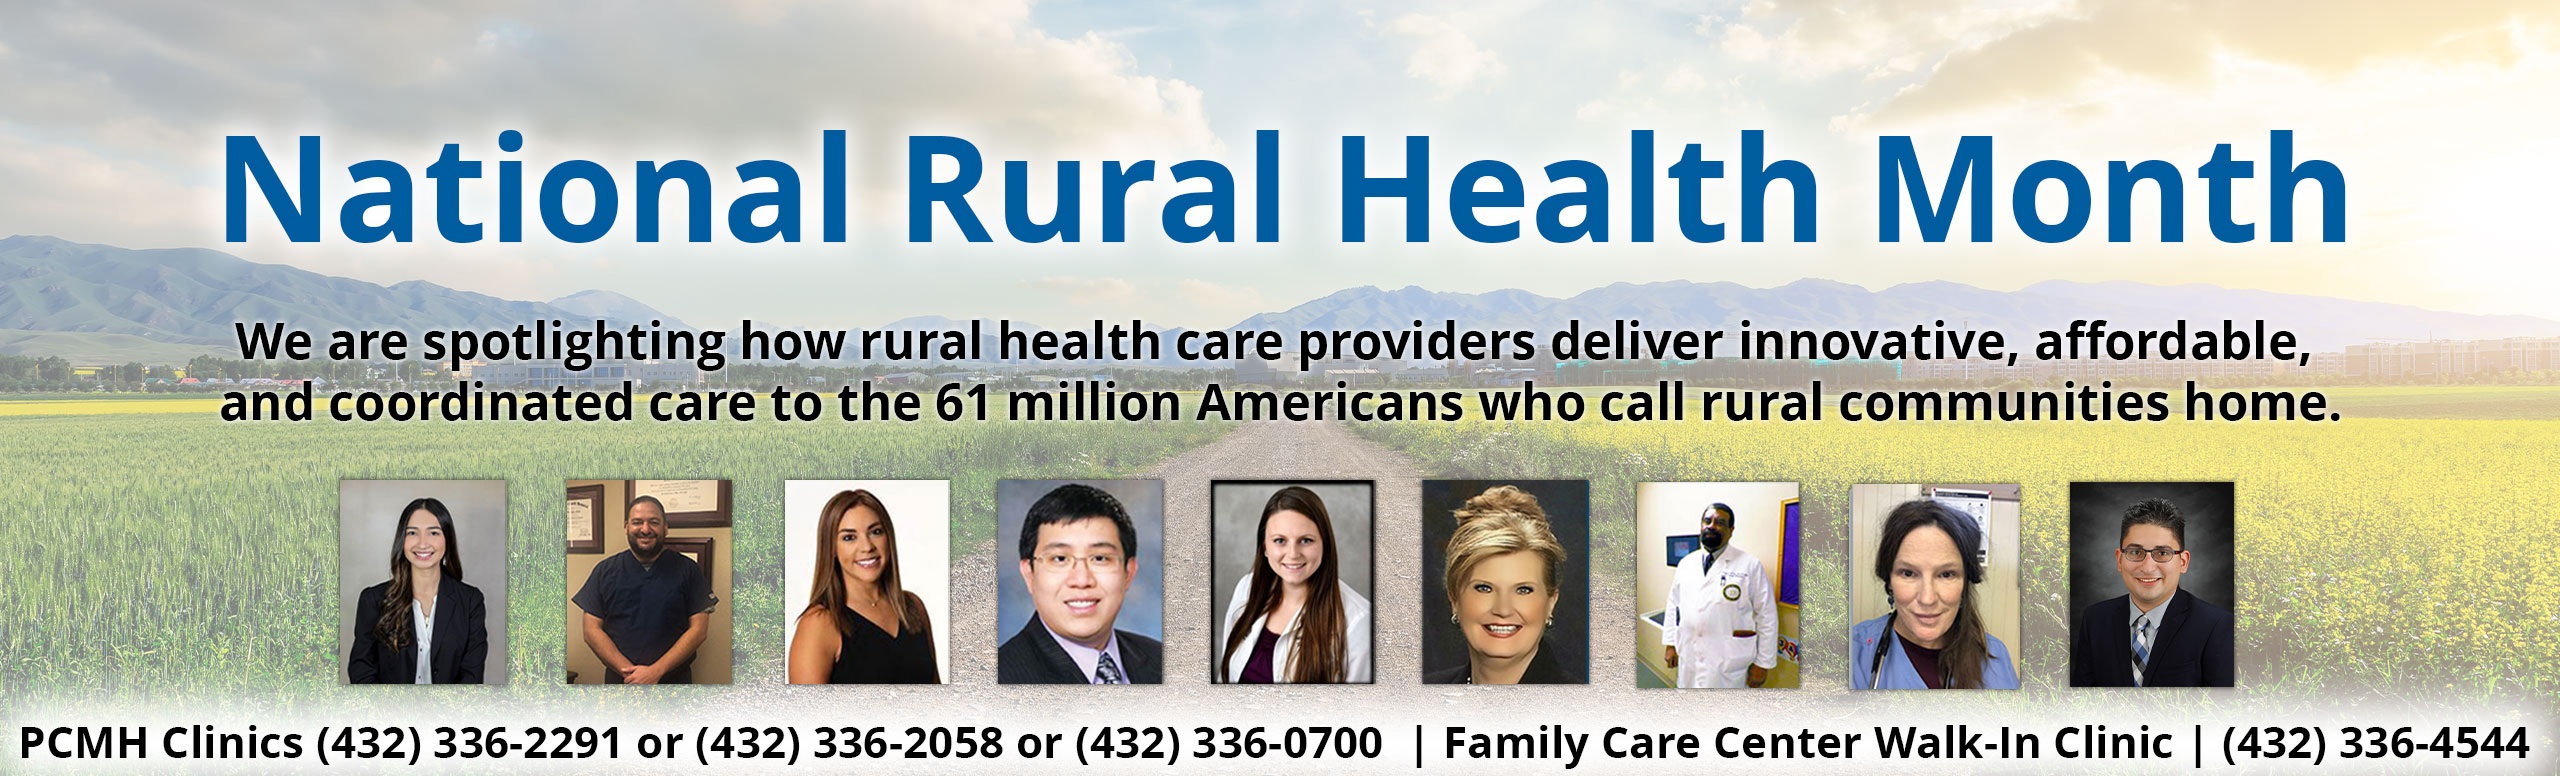 National Rural Health Month 

We are spotlighting how rural health care providers deliver innovative, affordable, and coordinated care to the 61 million Americans who call rural communities home.

PCMH Clinics (432) 336-2291 or (432) 336-2058 or (432) 336-0700  | Family Care Center Walk-In Clinic | (432) 336-4544